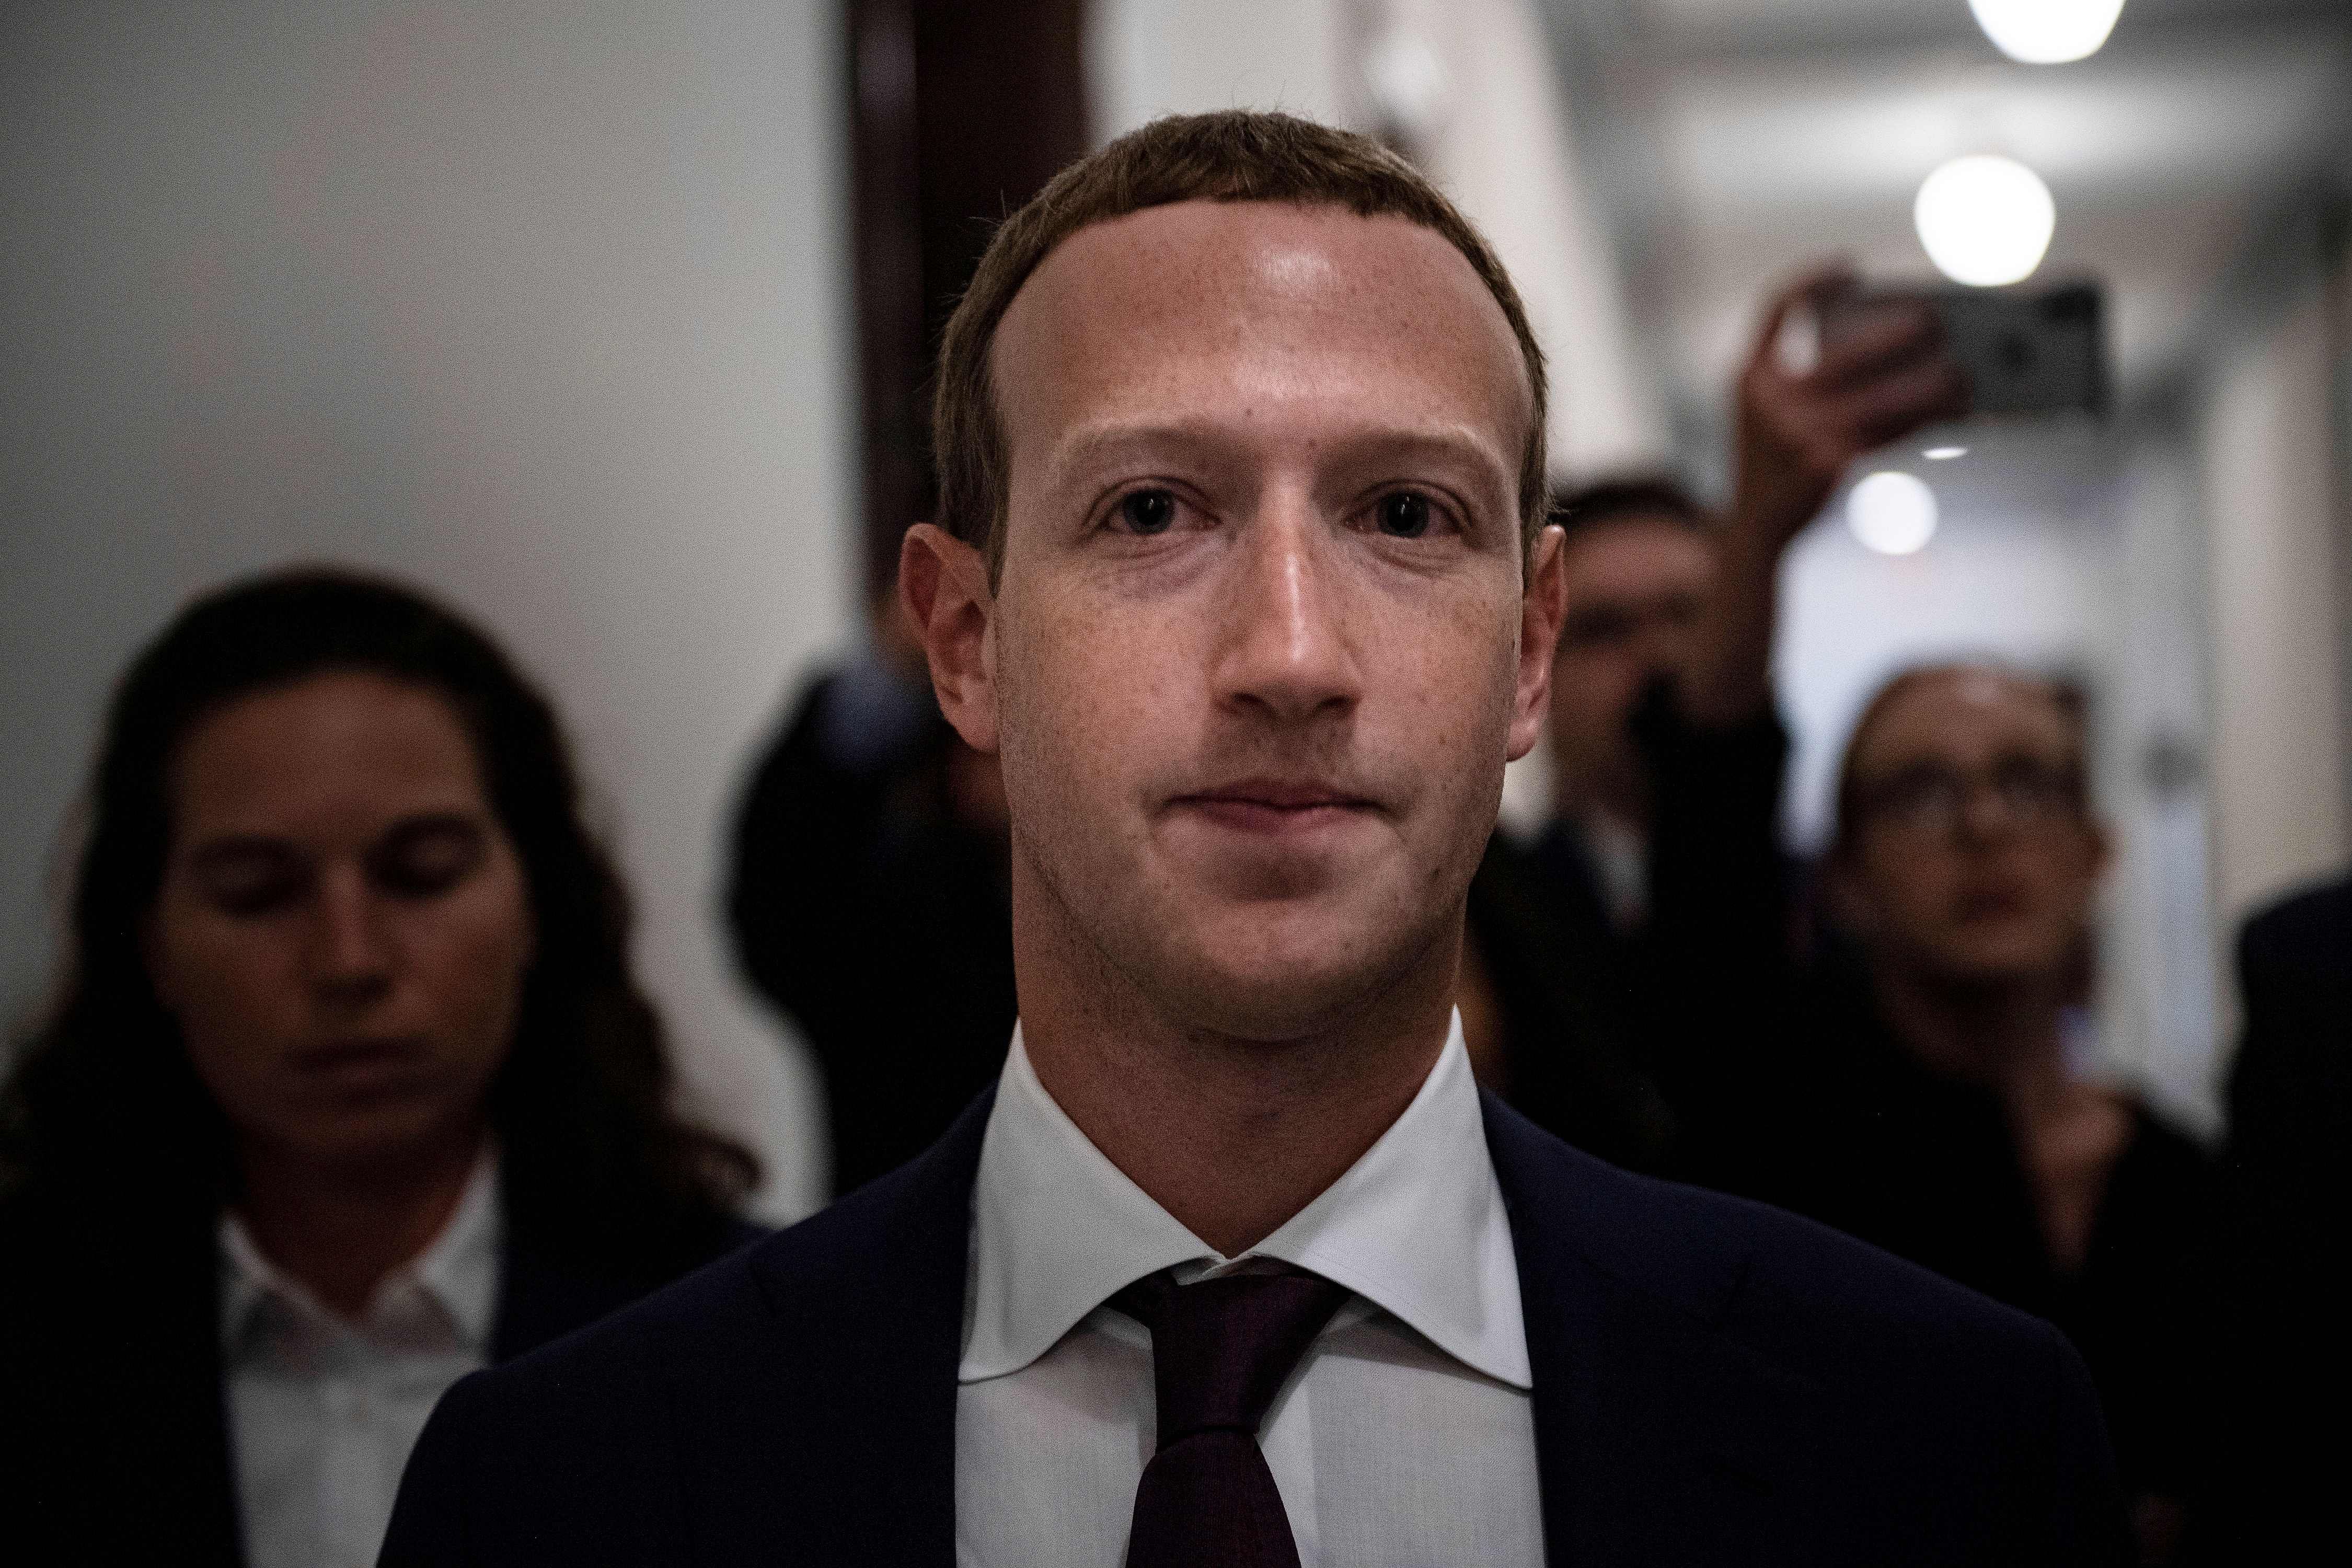 Facebook Chief Executive Mark Zuckerberg enters the office of U.S. Senator Josh Hawley (R-MO) while meeting with lawmakers to discuss "future internet regulation on Capitol Hill in Washington, U.S. (Reuters Photo)